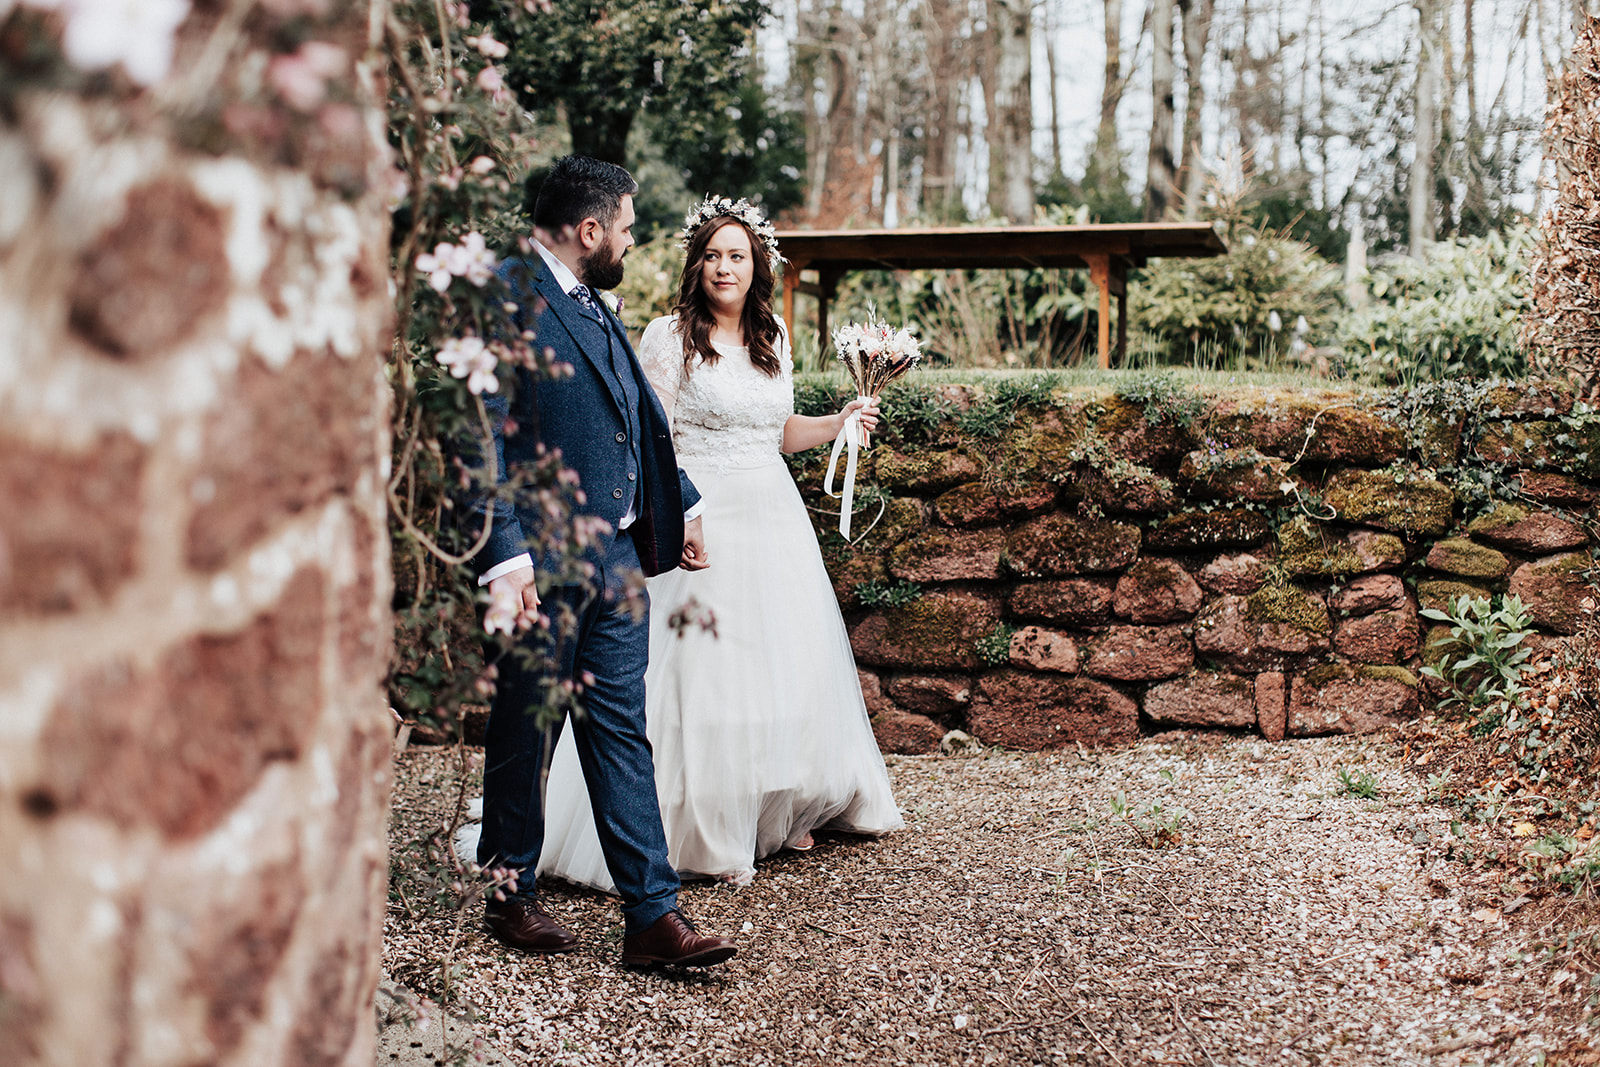 Intimate Elopement Wedding at The Folly and Brickhouse Vineyard in Exeter